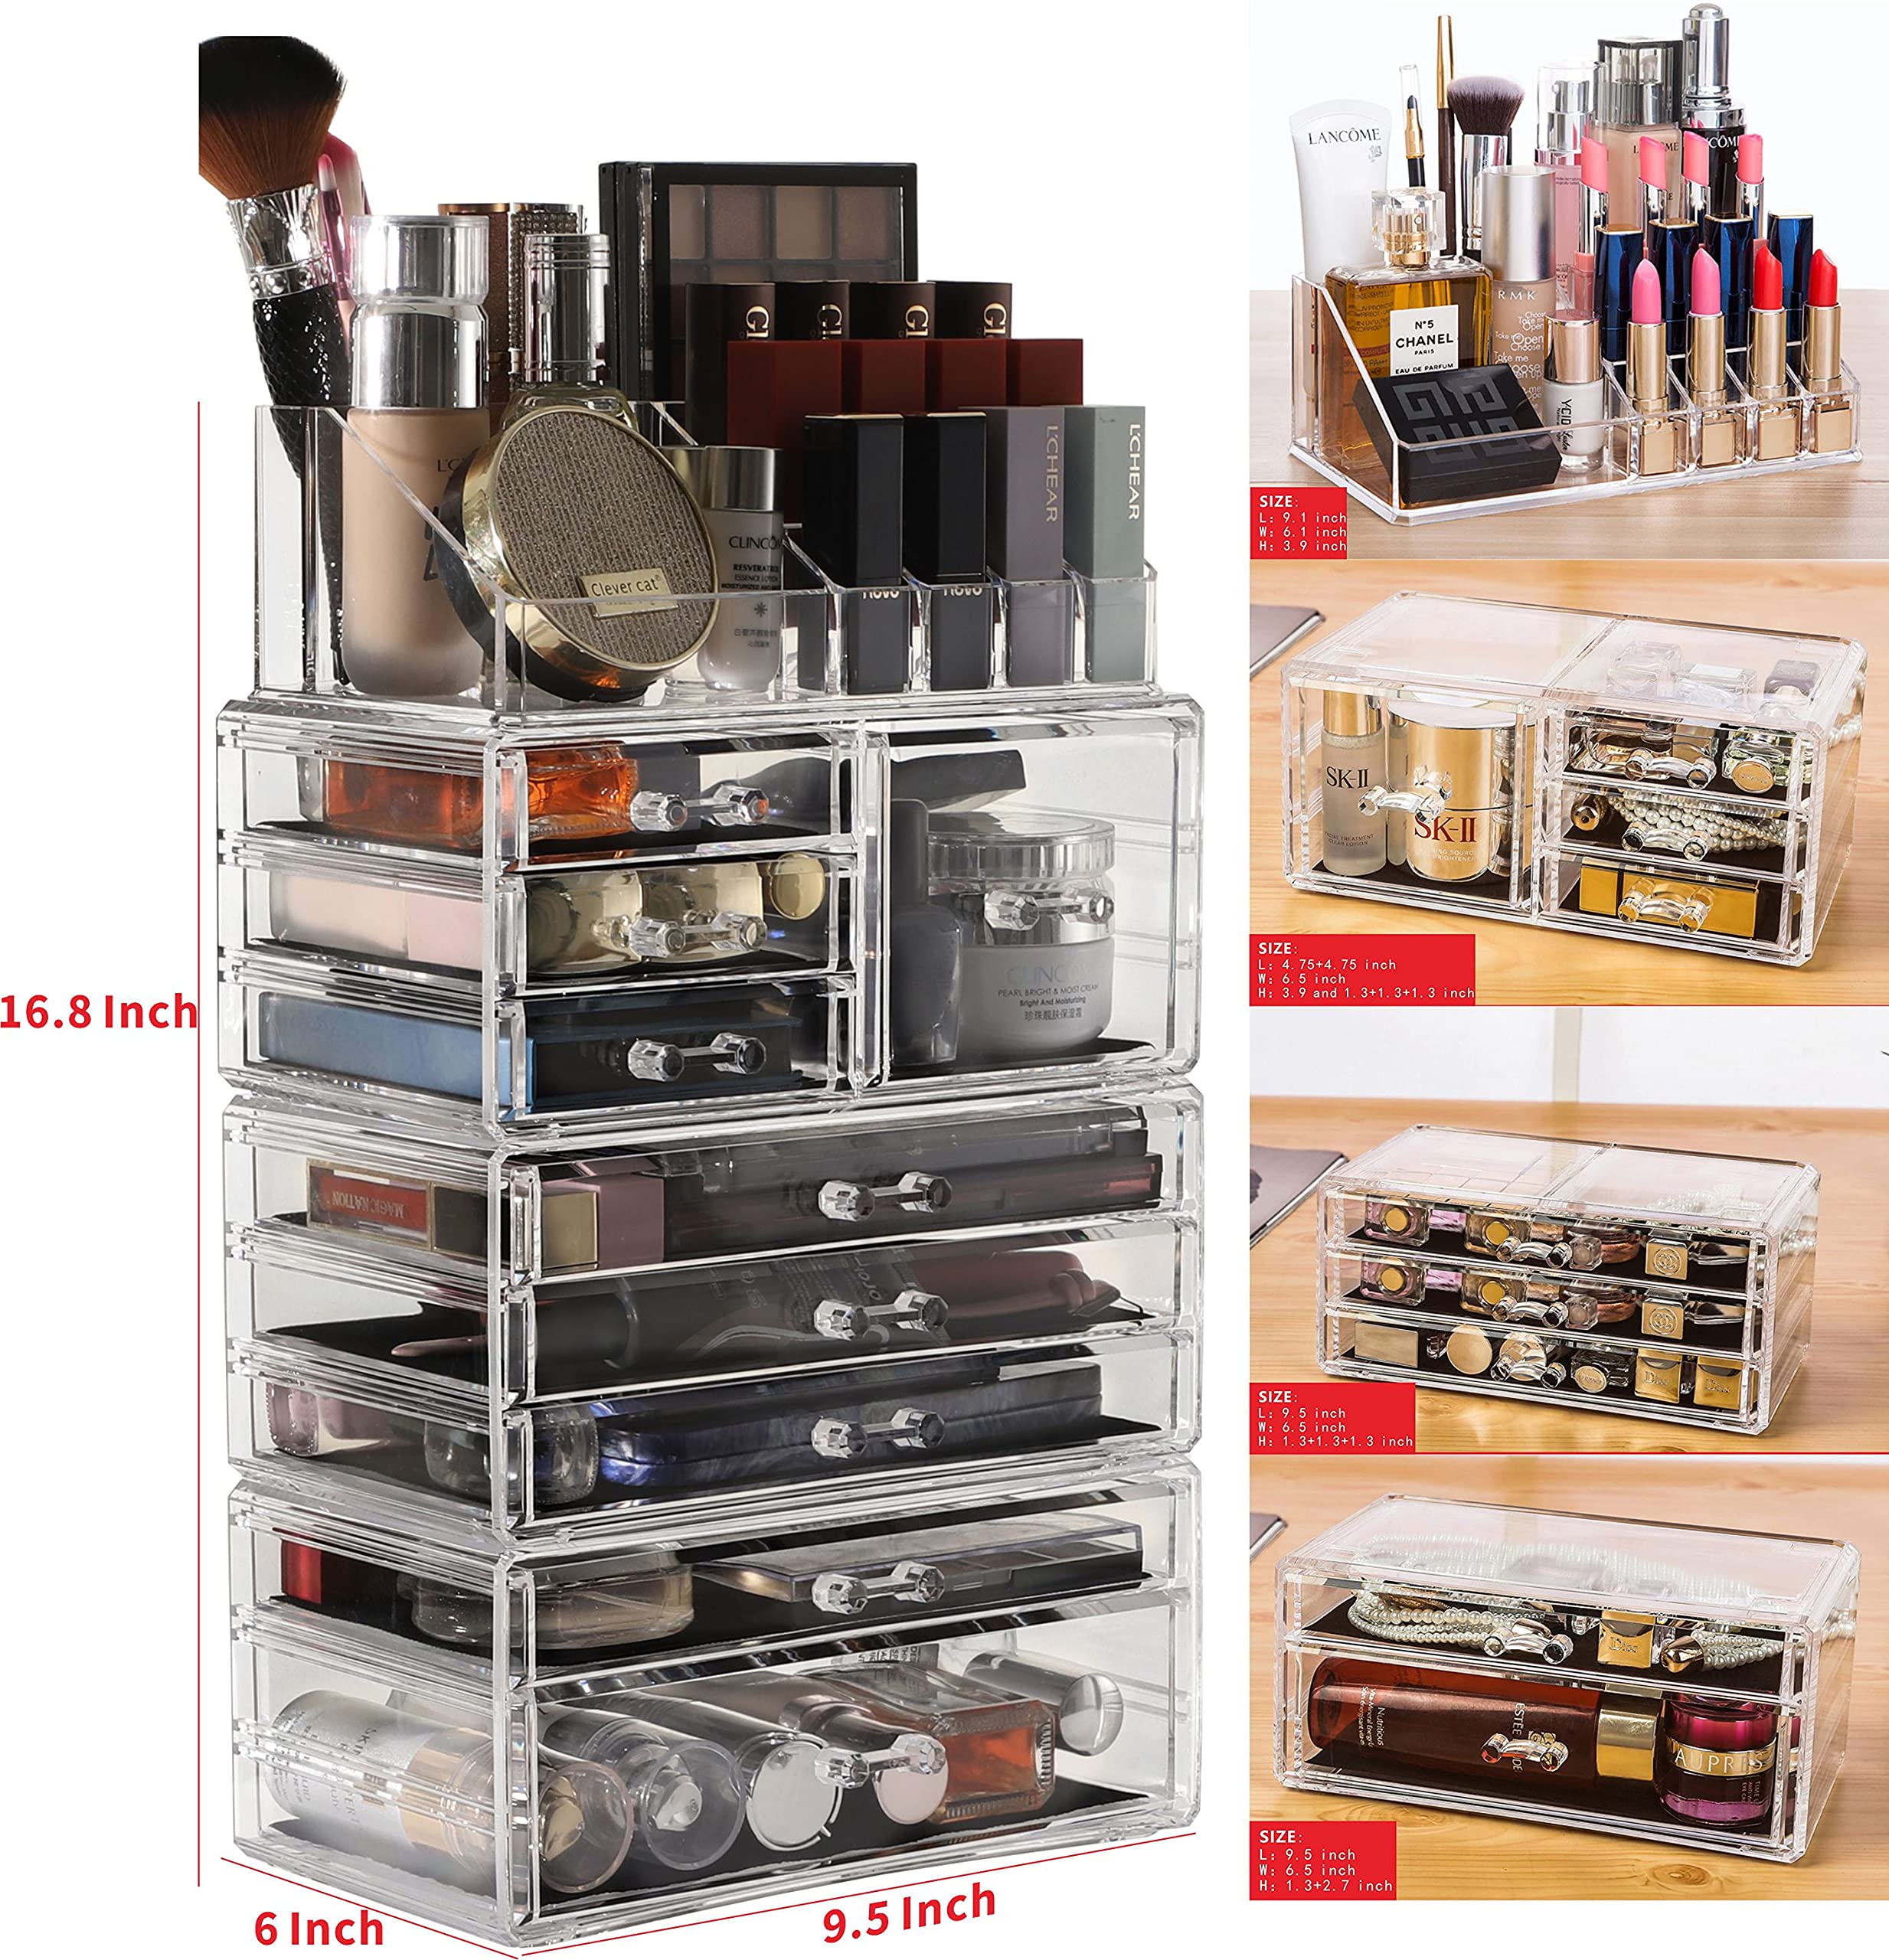 Cq acrylic Makeup Organizer Skin Care Large Clear Cosmetic Display Cases Stackable Storage Box With 9 Drawers For Vanity,Set of 4